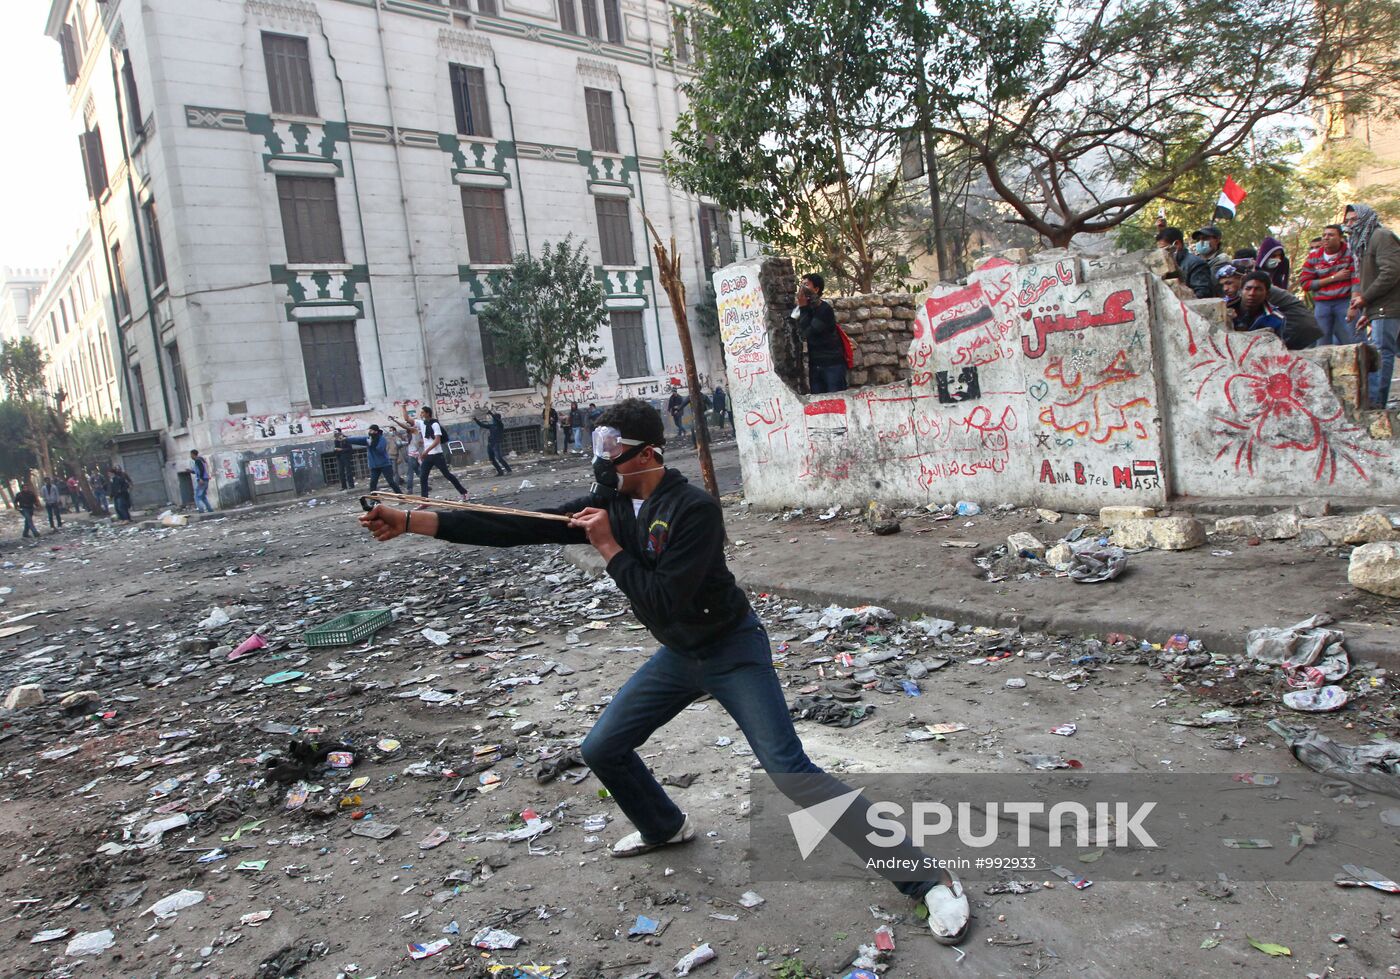 Protesters, police clash in Cairo, Egypt